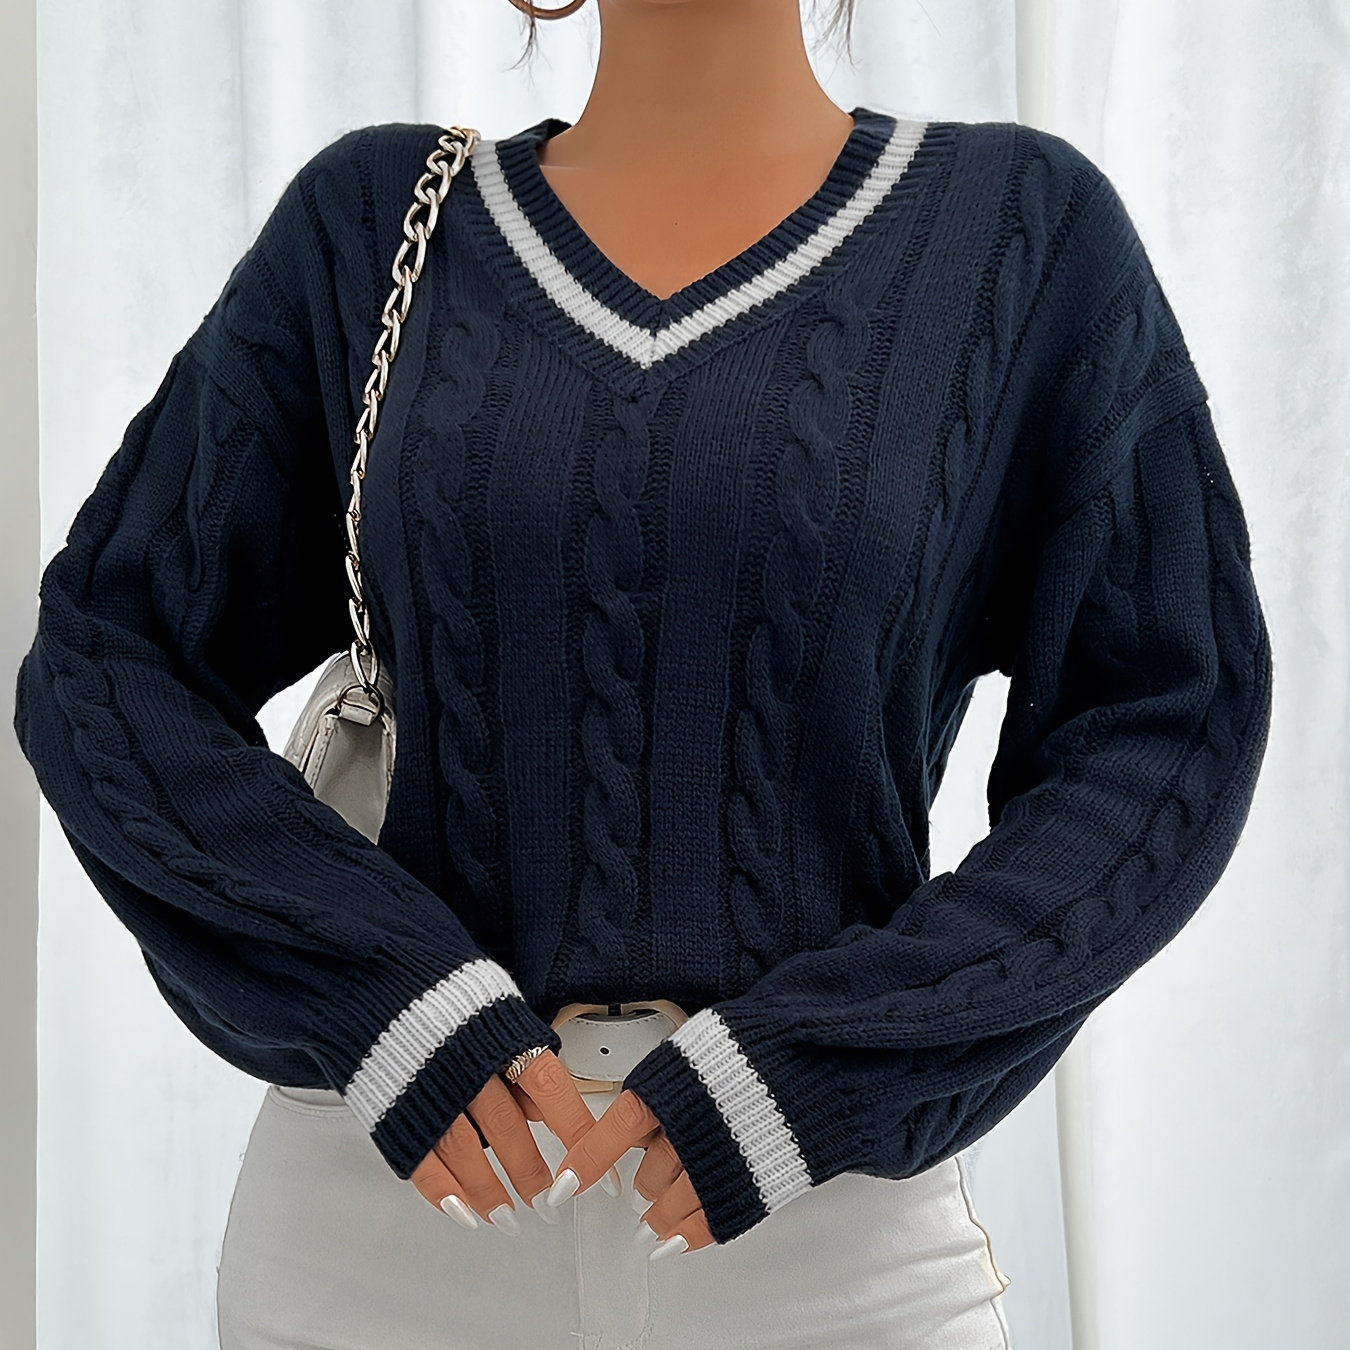 

Cable Knit Contrast Trim Sweater, Preppy Lantern Sleeve V-neck Drop Shoulder Knitted Top, Women's Clothing